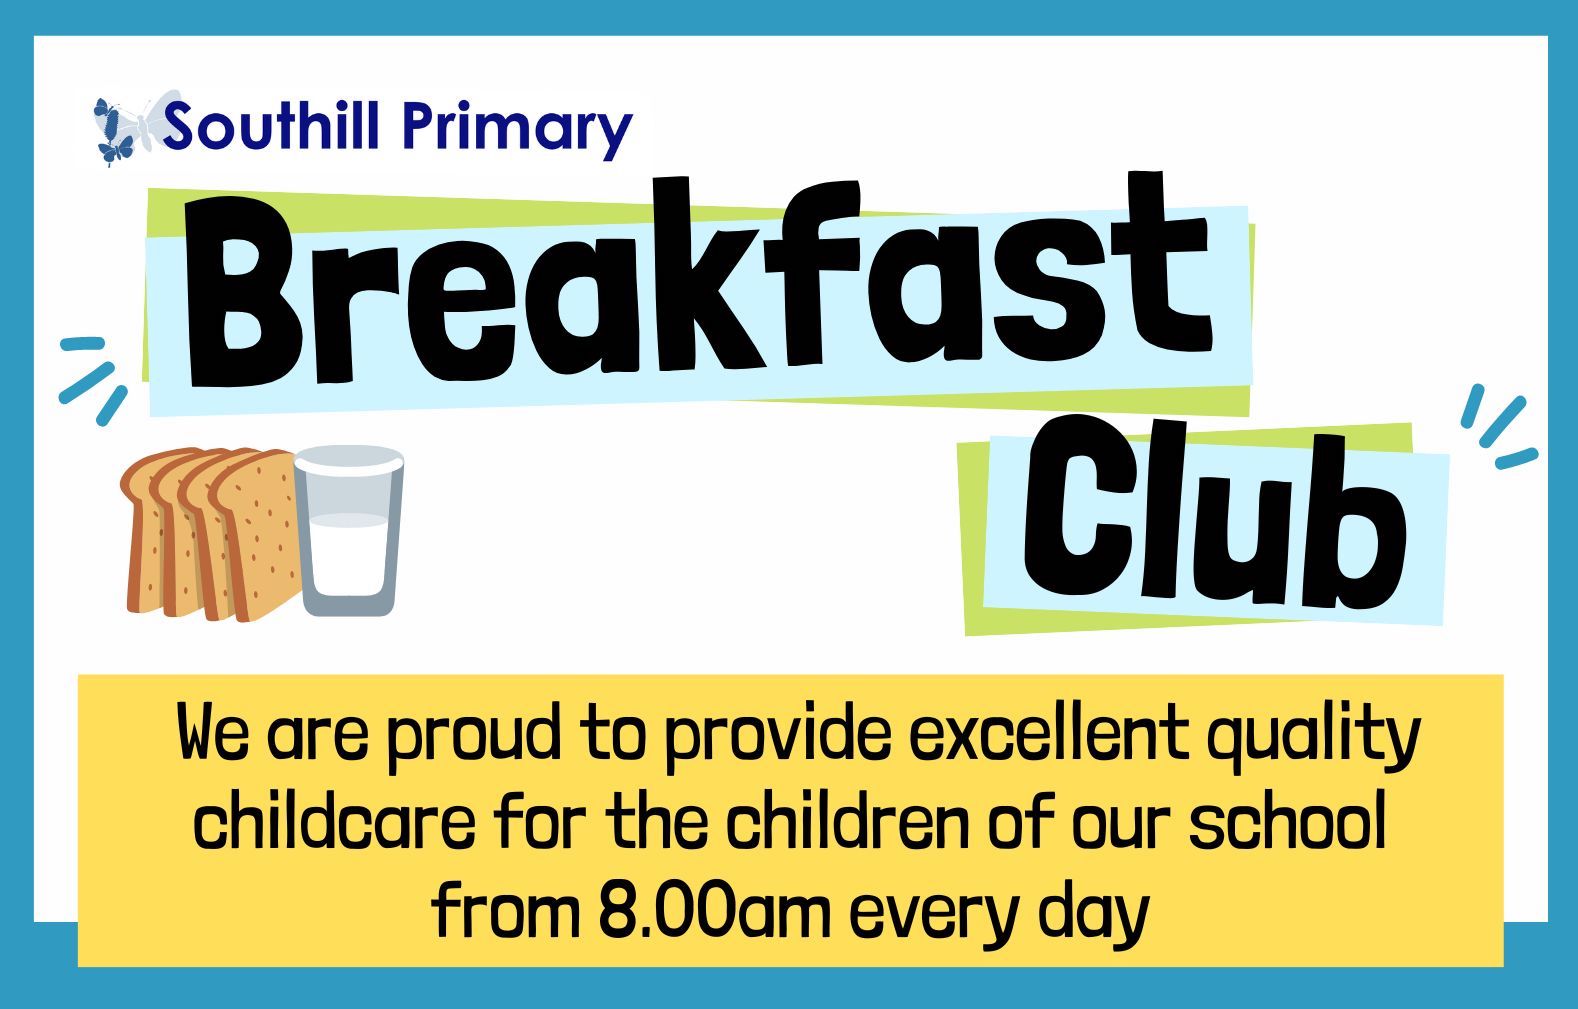 'Breakfast Club' title with graphic of toast and milk with text: 'we are proud to provide excellent quality childcare for the children of our school from 8:00am every day' on a white and blue background 